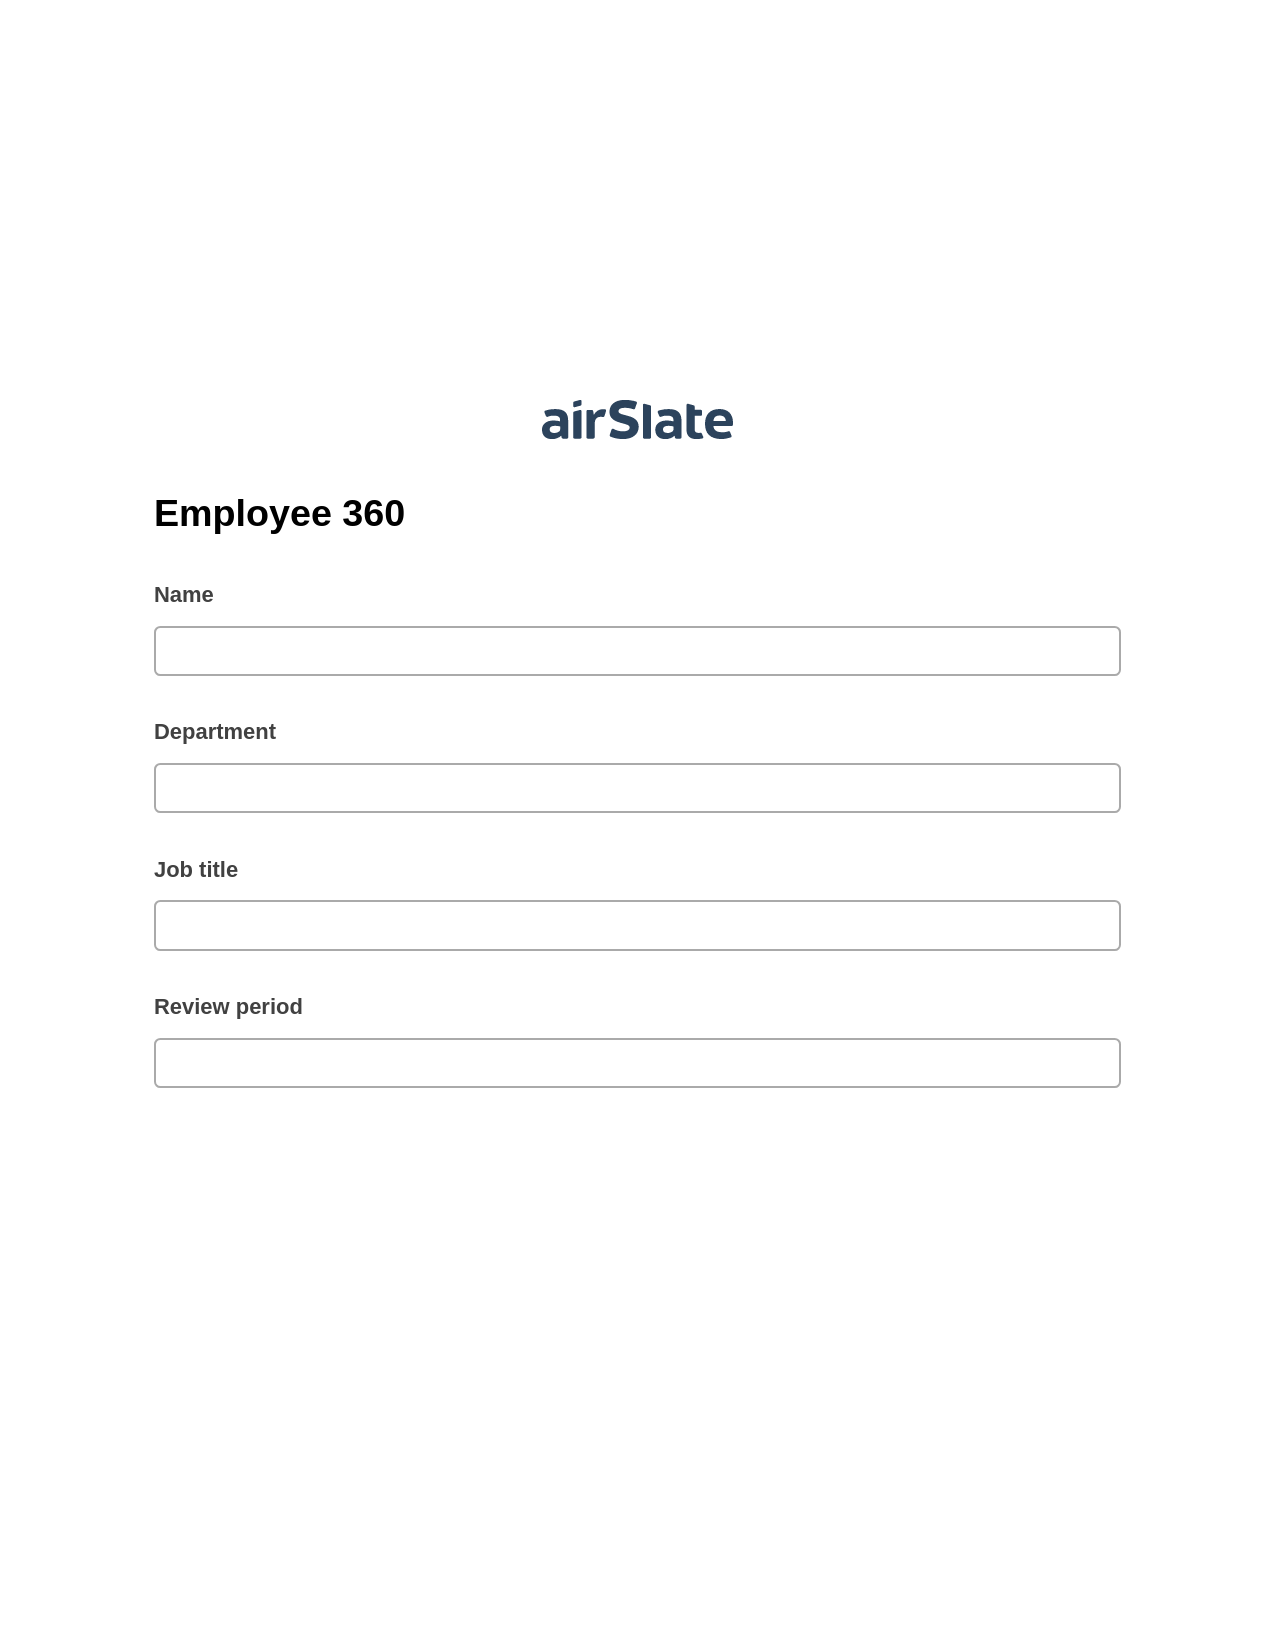 Employee 360 Pre-fill from MS Dynamics 365 Records, Remove Tags From Slate Bot, Export to Smartsheet